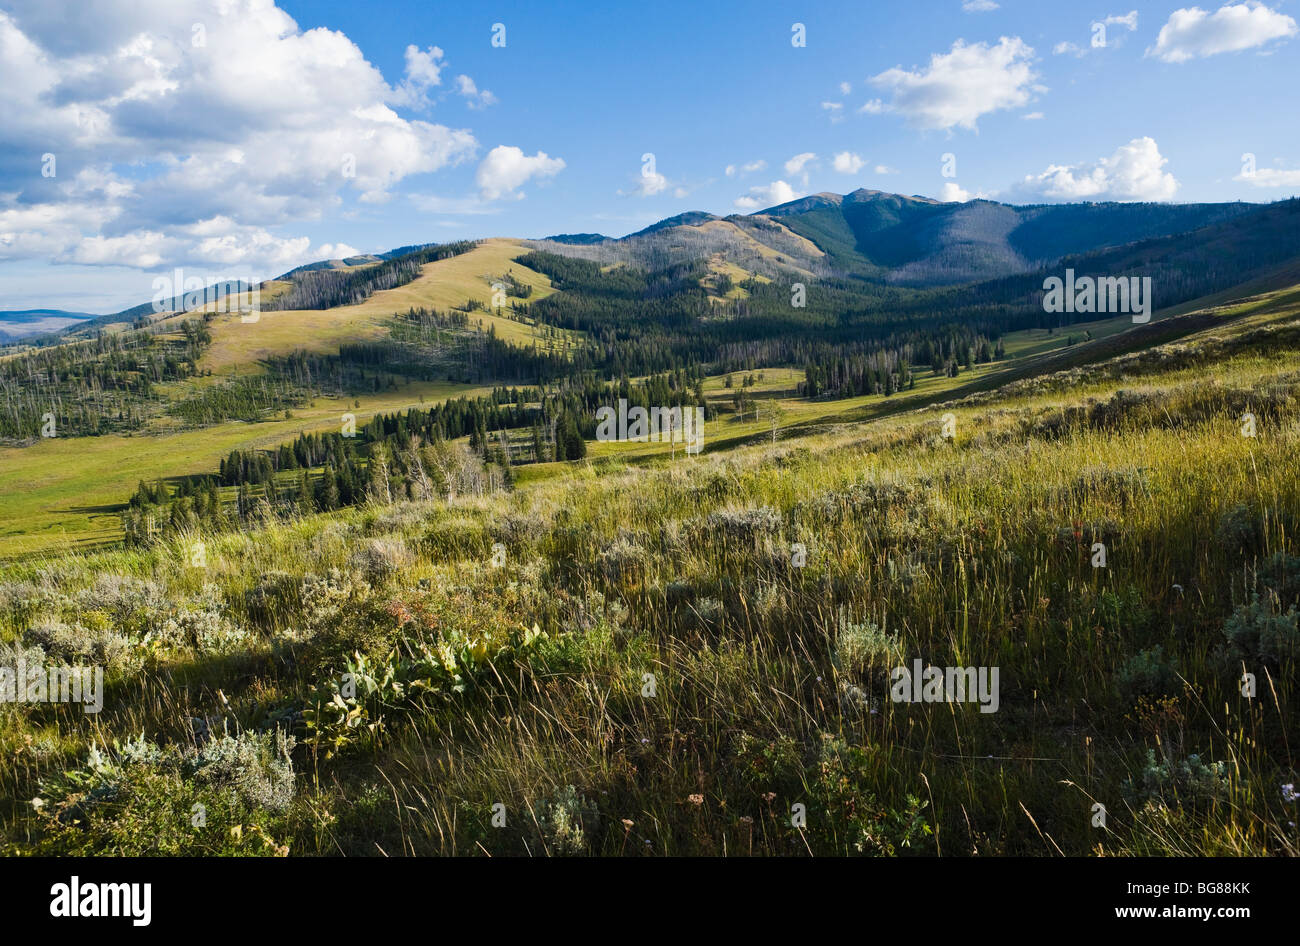 Mount Washburn and Antelope Creek valley, in Yellowstone National Park, Wyoming, USA. Stock Photo